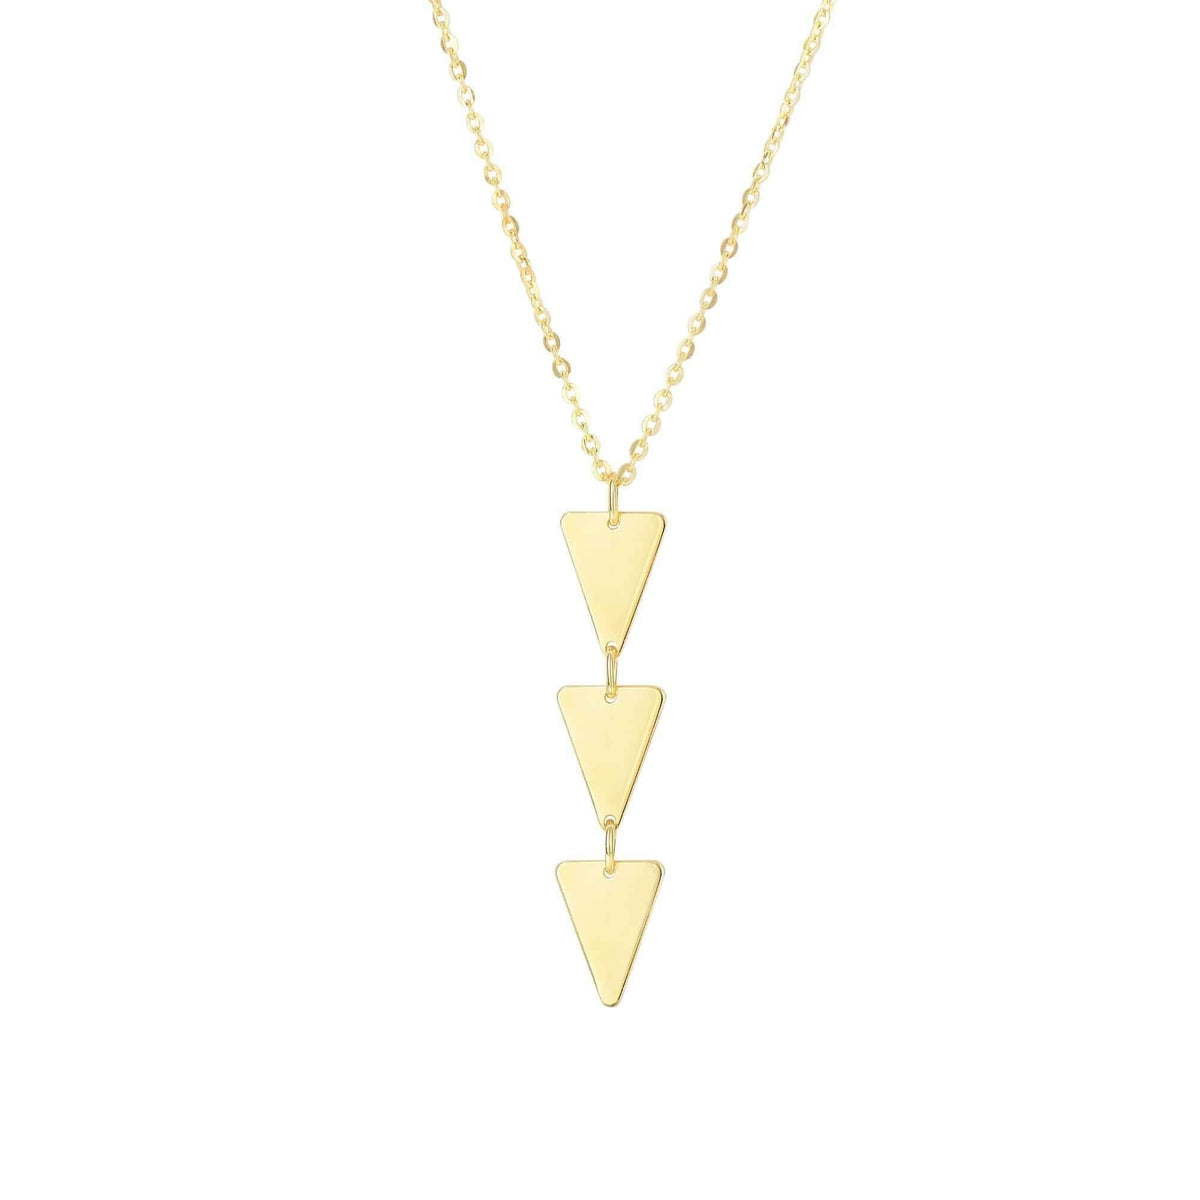 14K Yellow Gold 3 Tier Triangle Pendant Necklace